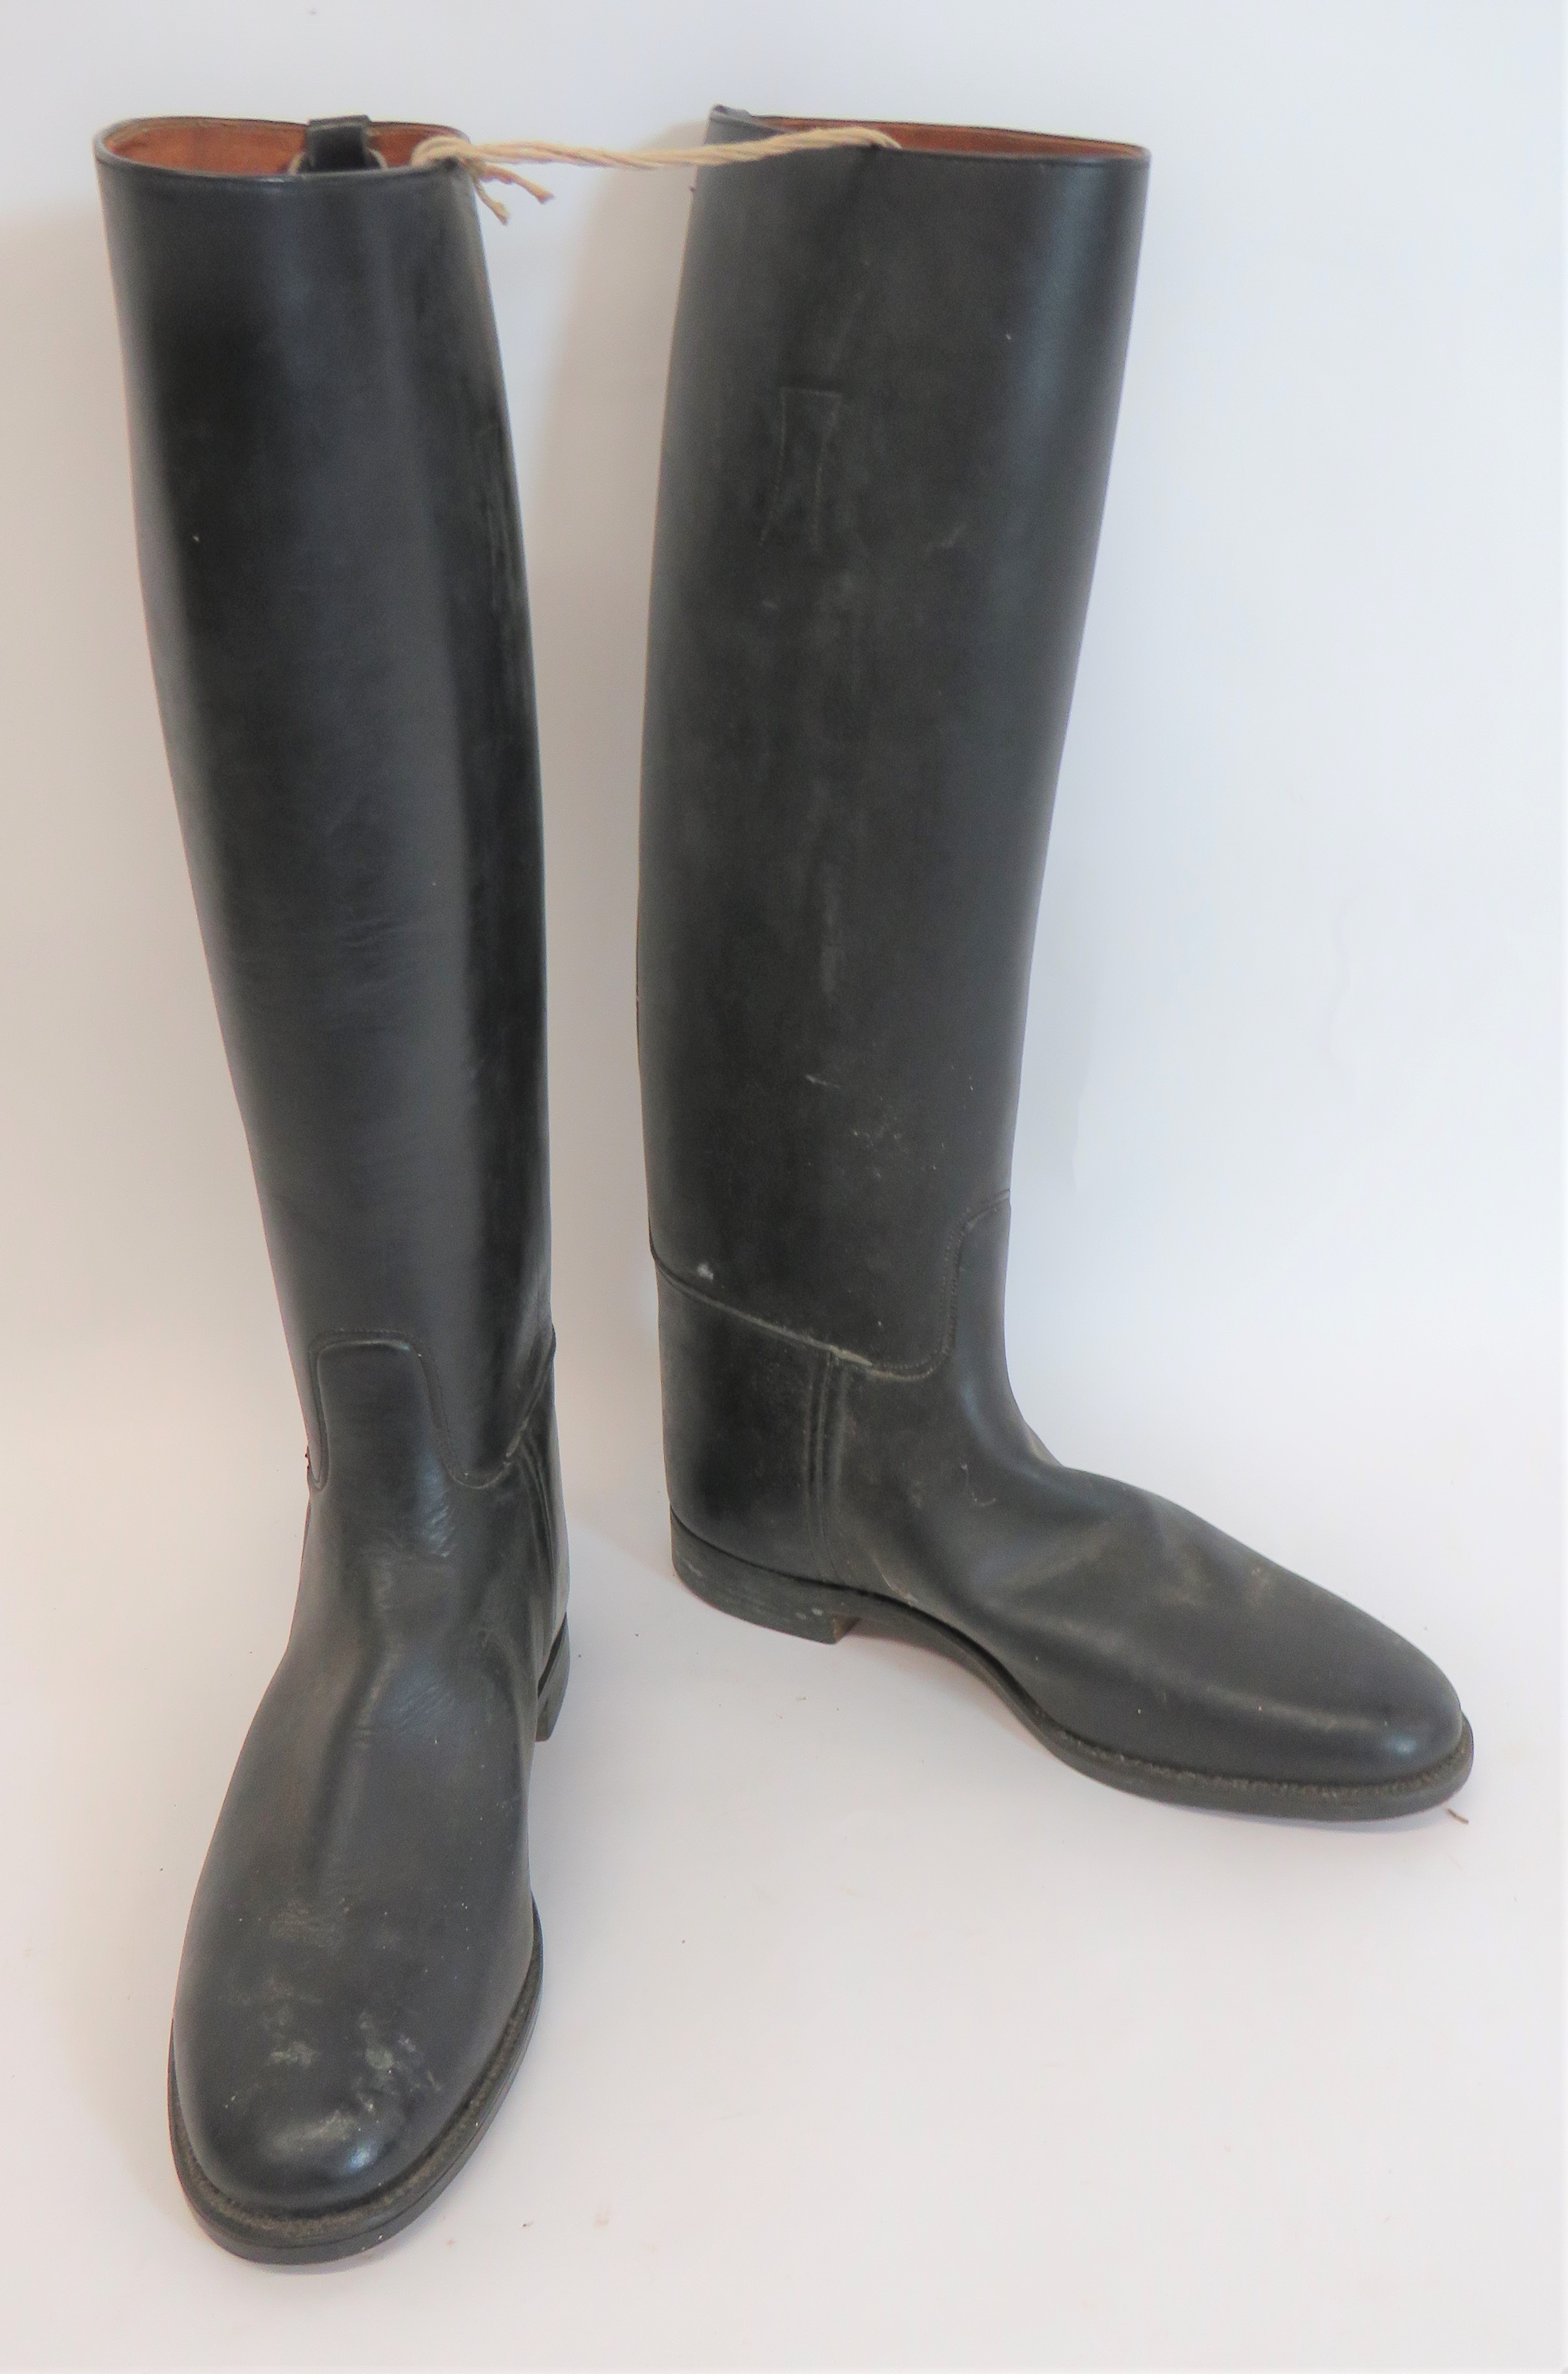 Pair of Cavalry Pattern Leather Boots black leather, high leg boots.  Leather soles and heels.